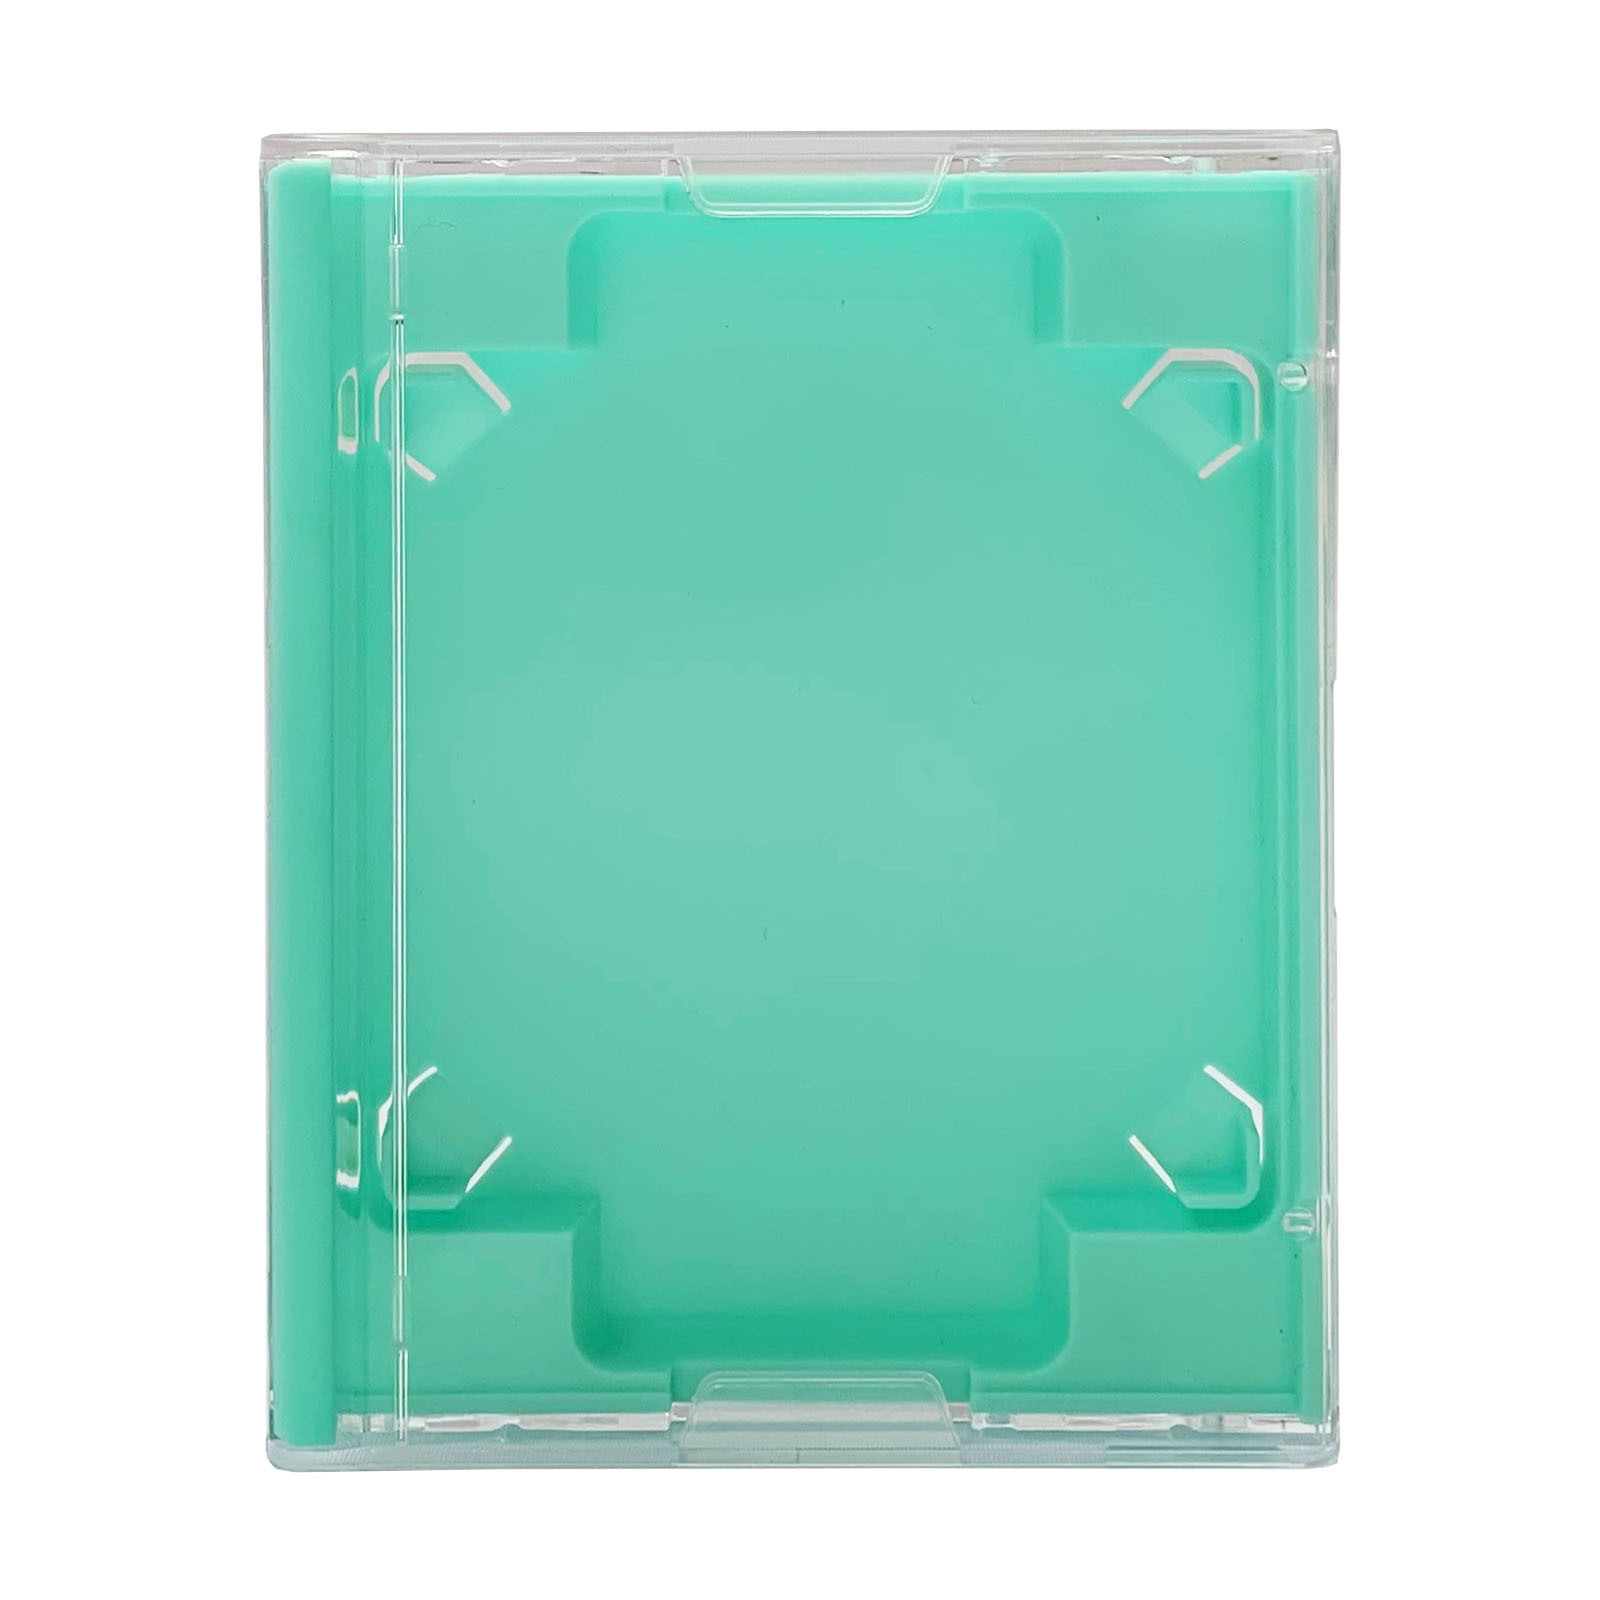 Full size MiniDisc case with a mint inner tray - Retro Style Media